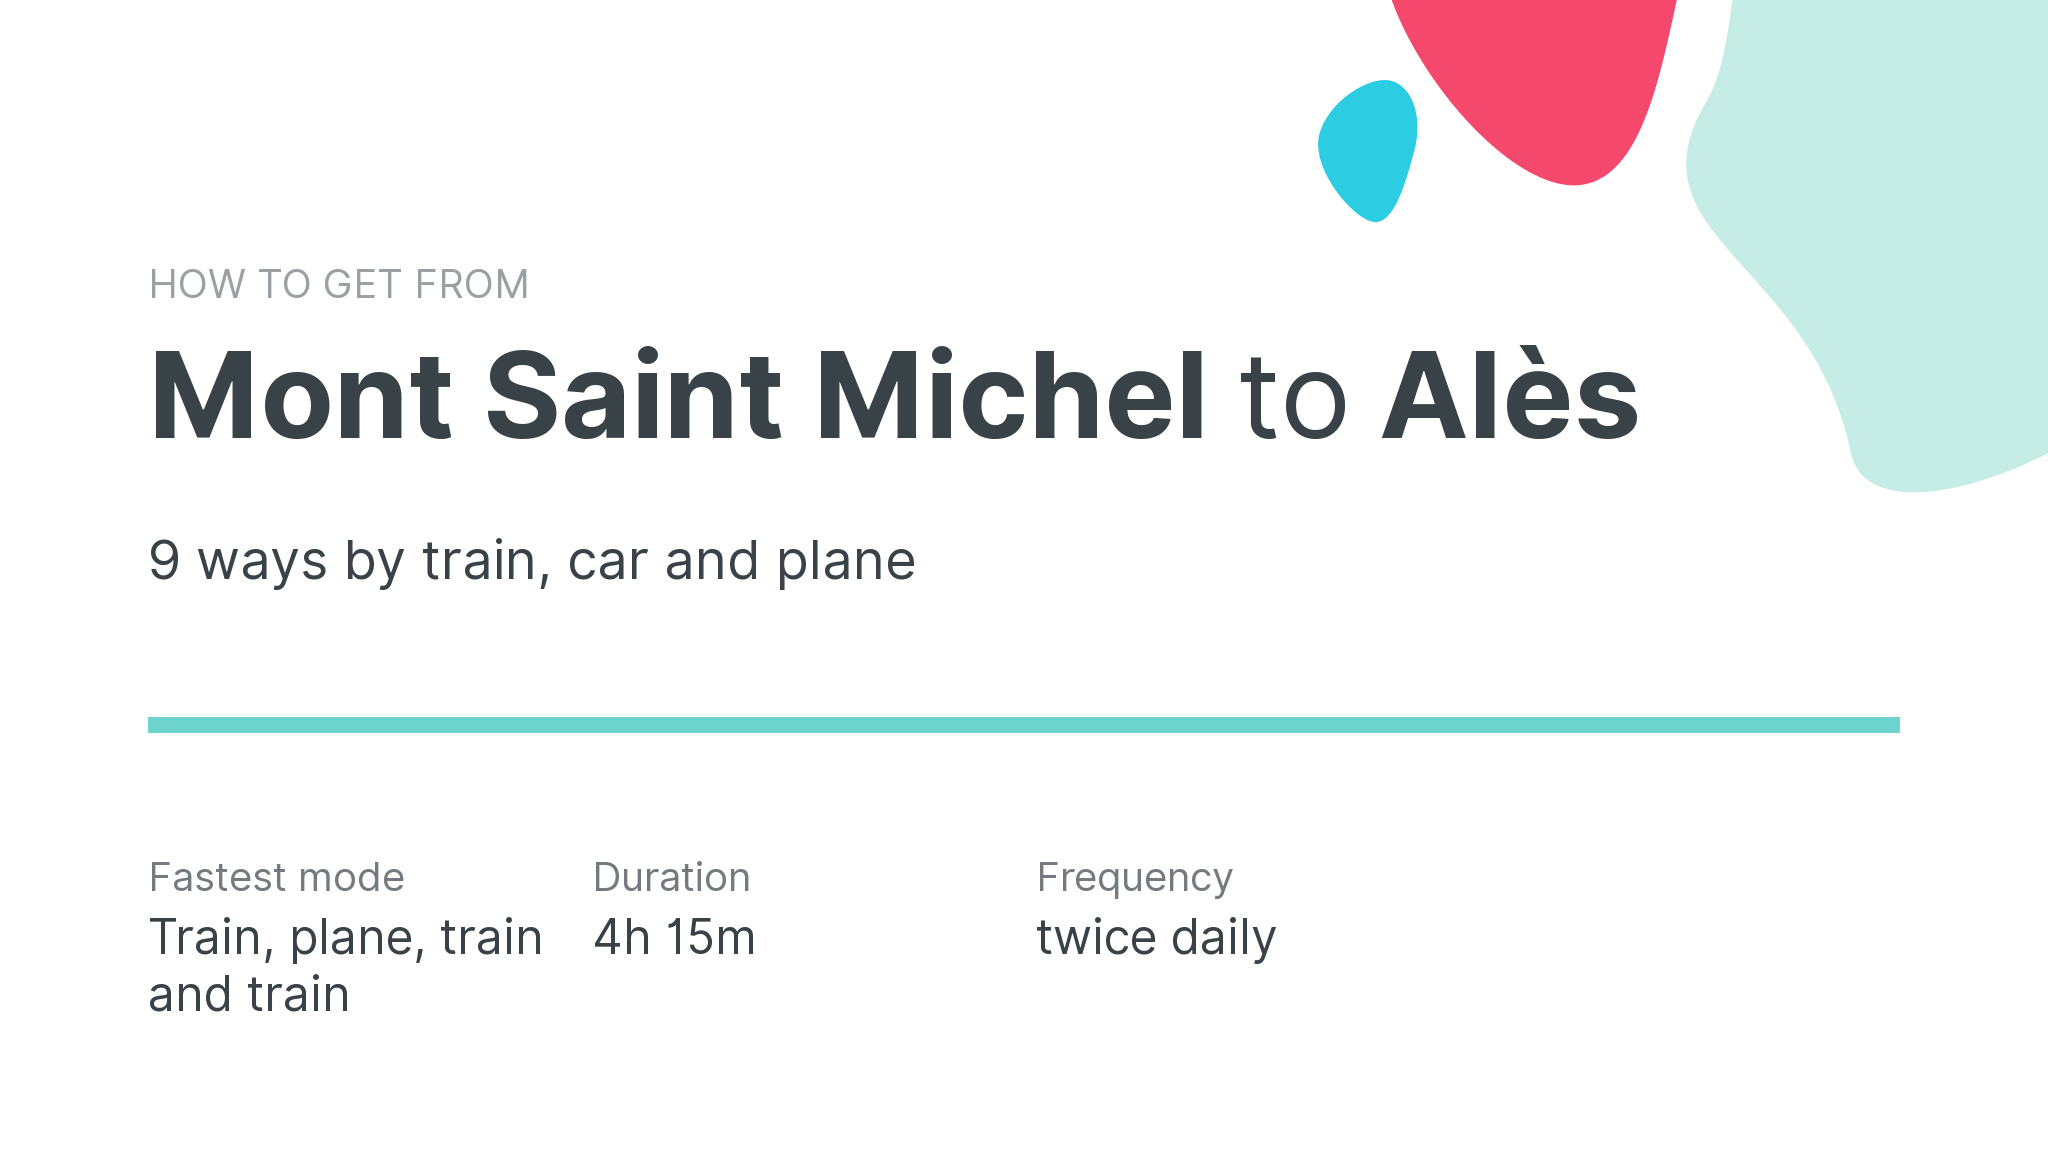 How do I get from Mont Saint Michel to Alès